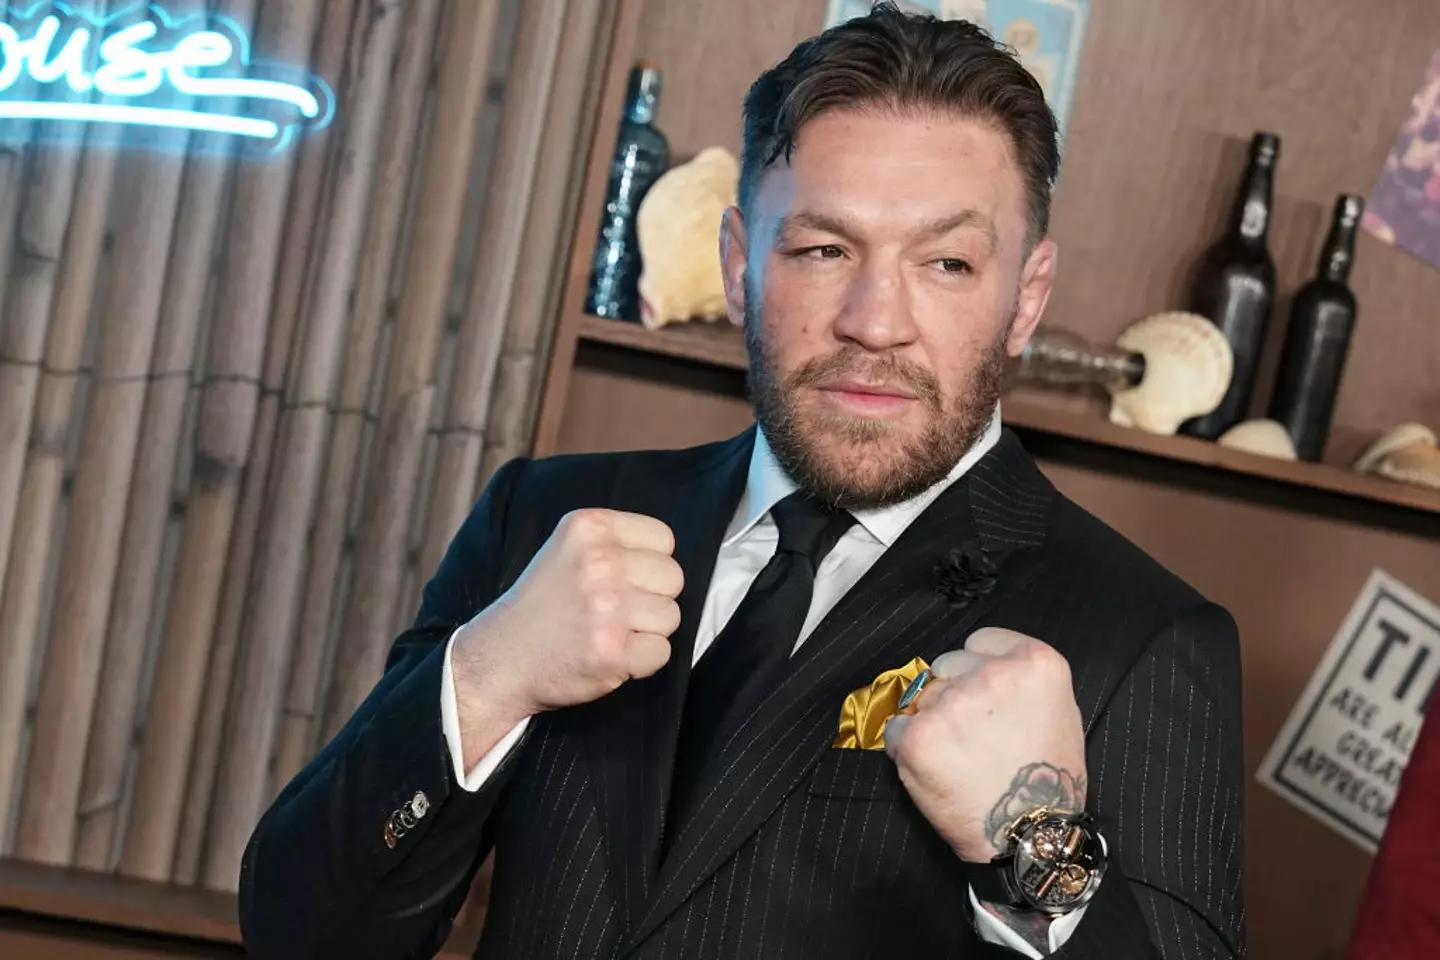 Conor McGregor revealed that he almost had a role in a big TV show.